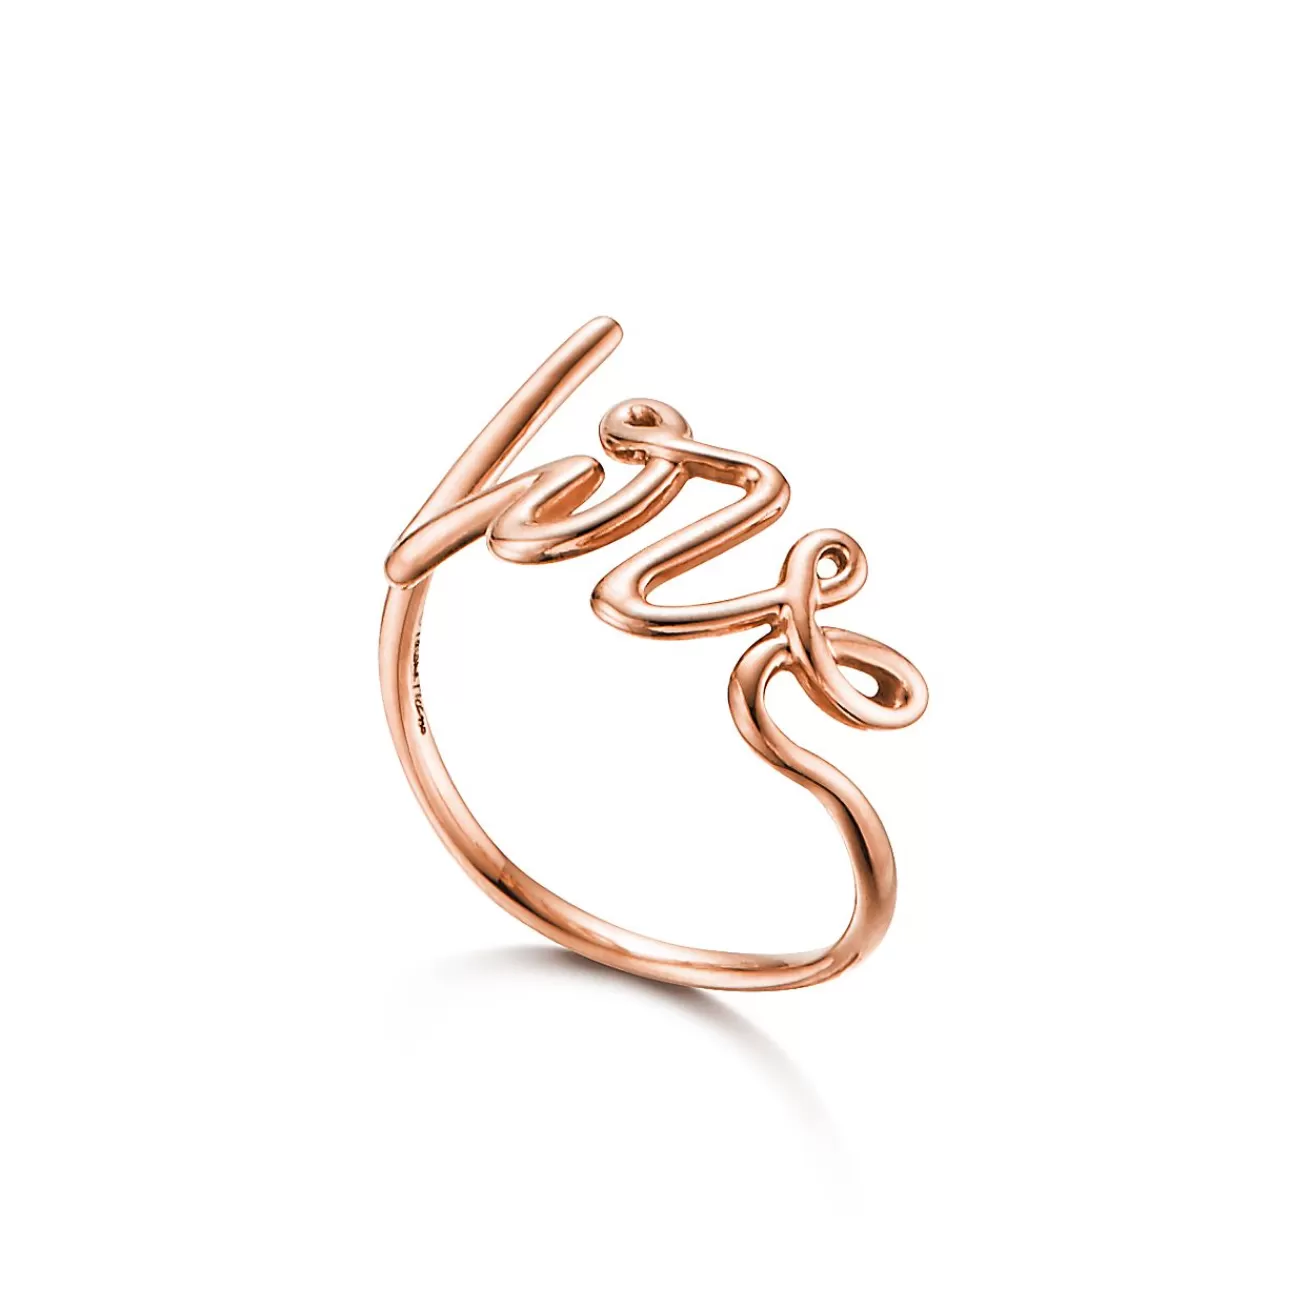 Tiffany & Co. Paloma's Graffiti Love Ring in Rose Gold, Small | ^ Rings | Rose Gold Jewelry